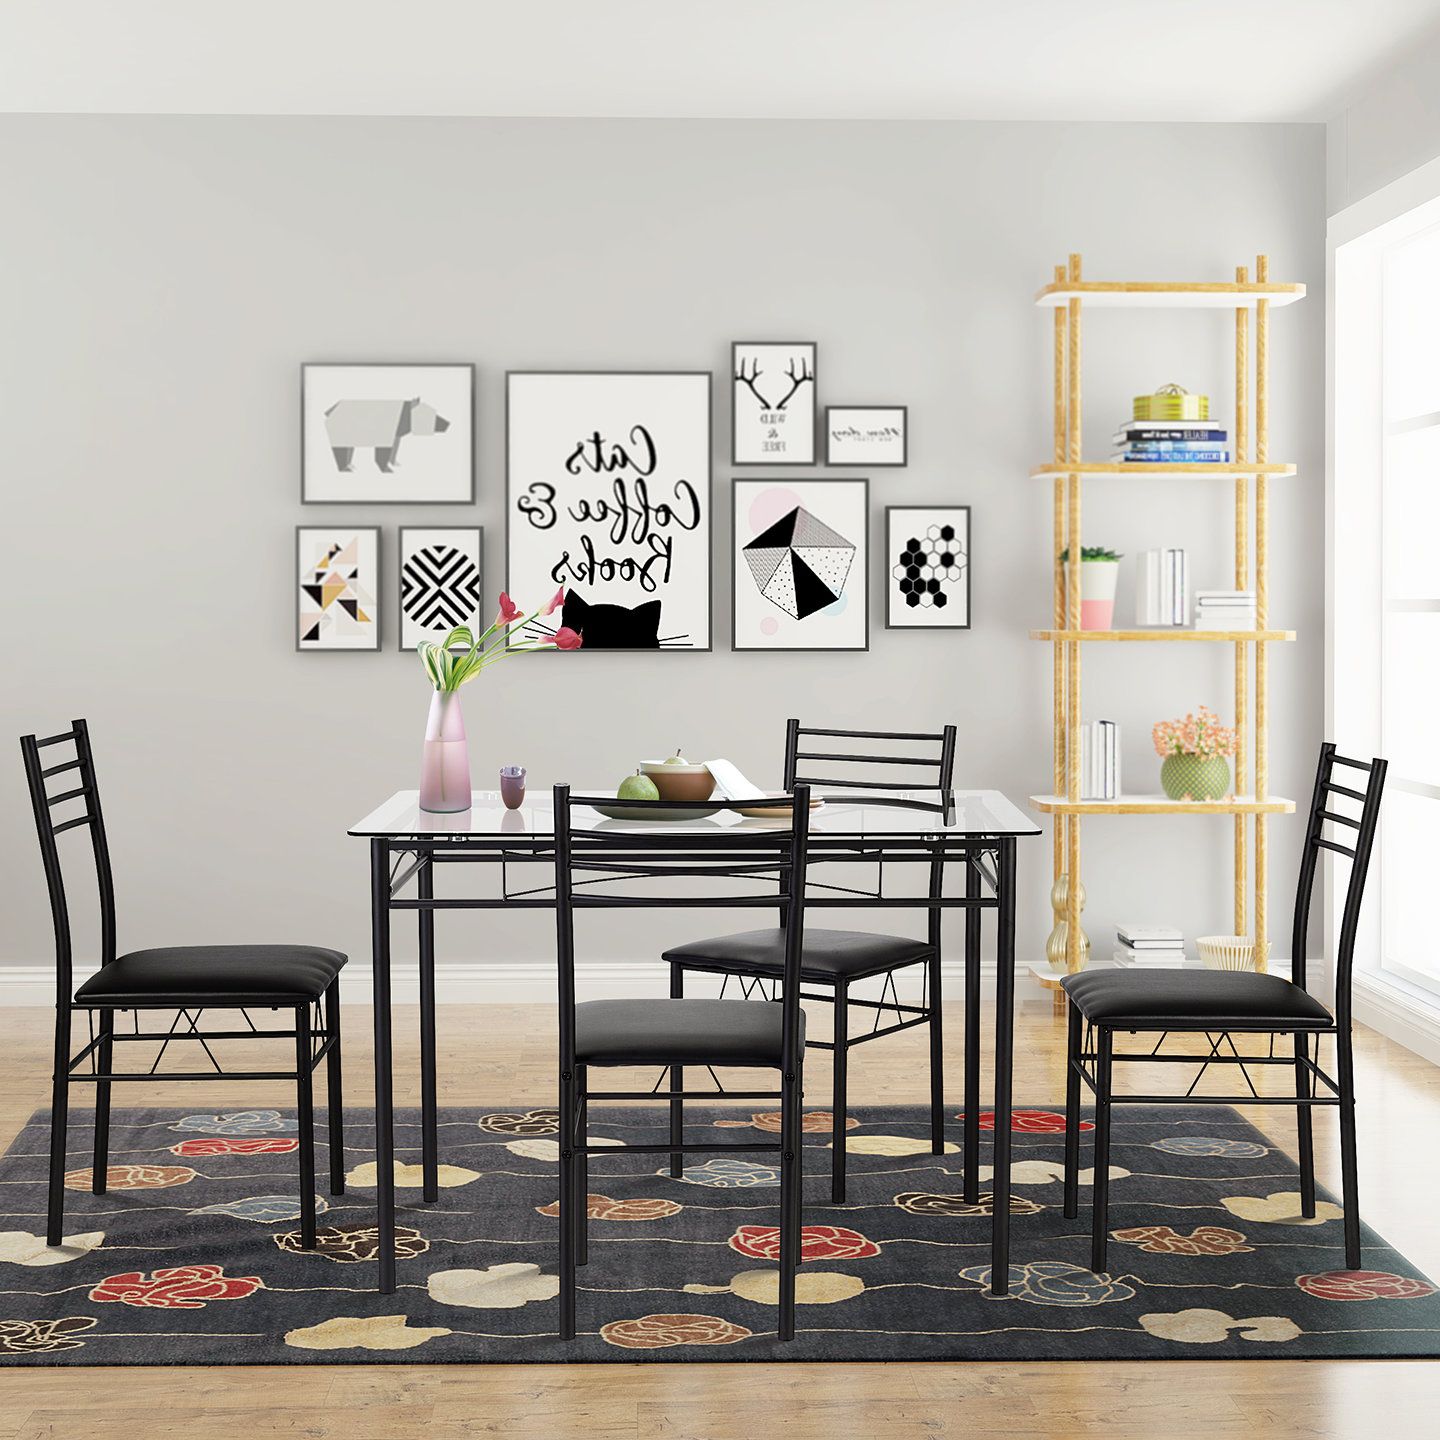 Taulbee 5 Piece Dining Set Throughout Well Known Lightle 5 Piece Breakfast Nook Dining Sets (View 10 of 20)